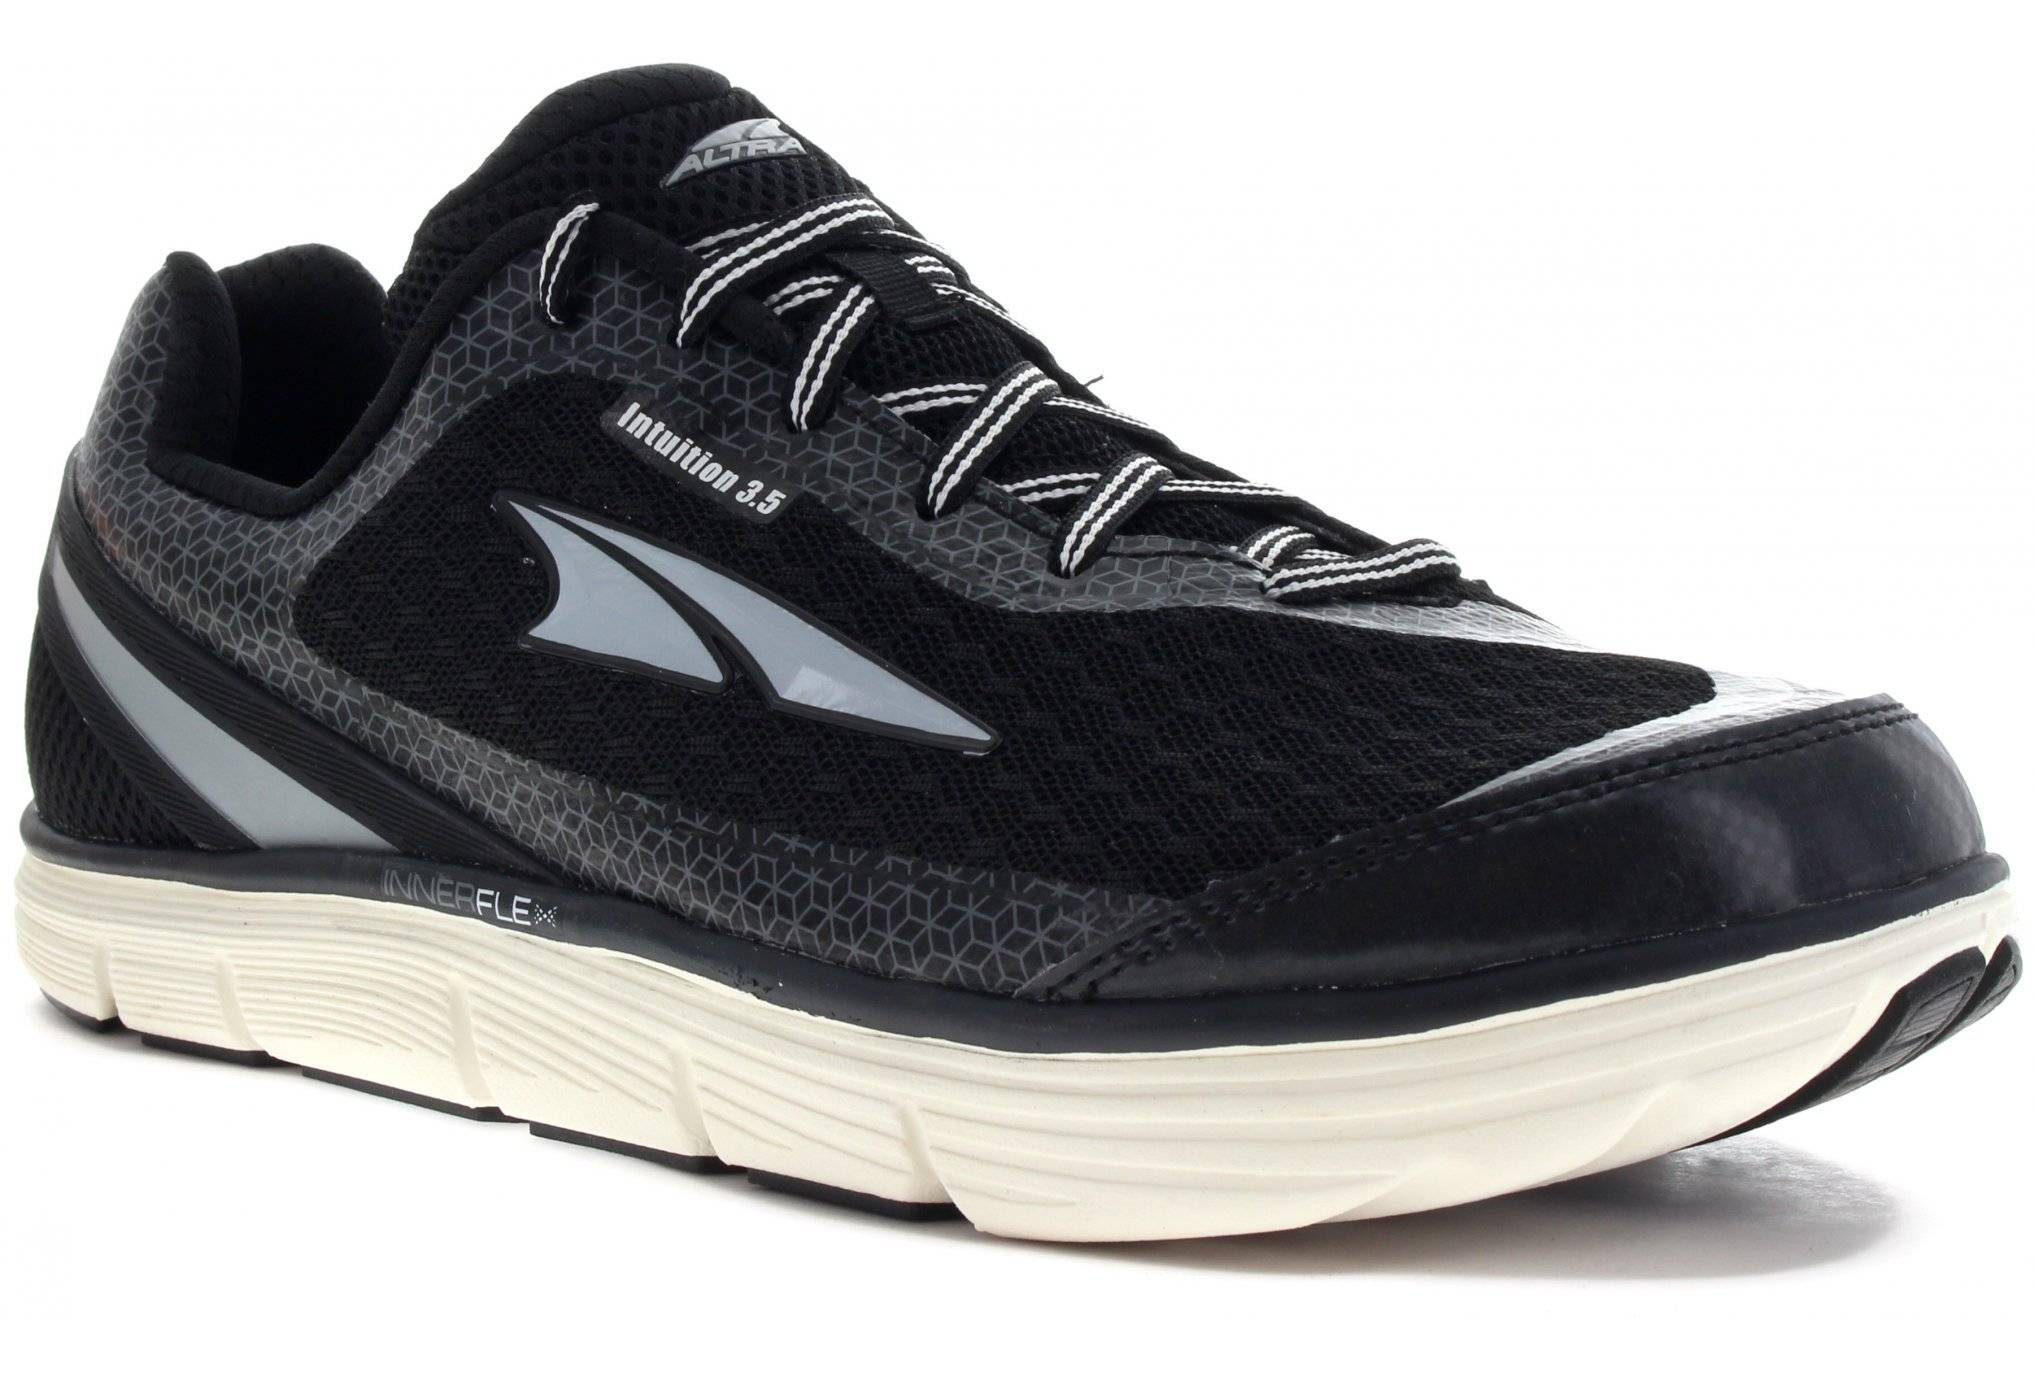 Altra Intuition 3.5 W 